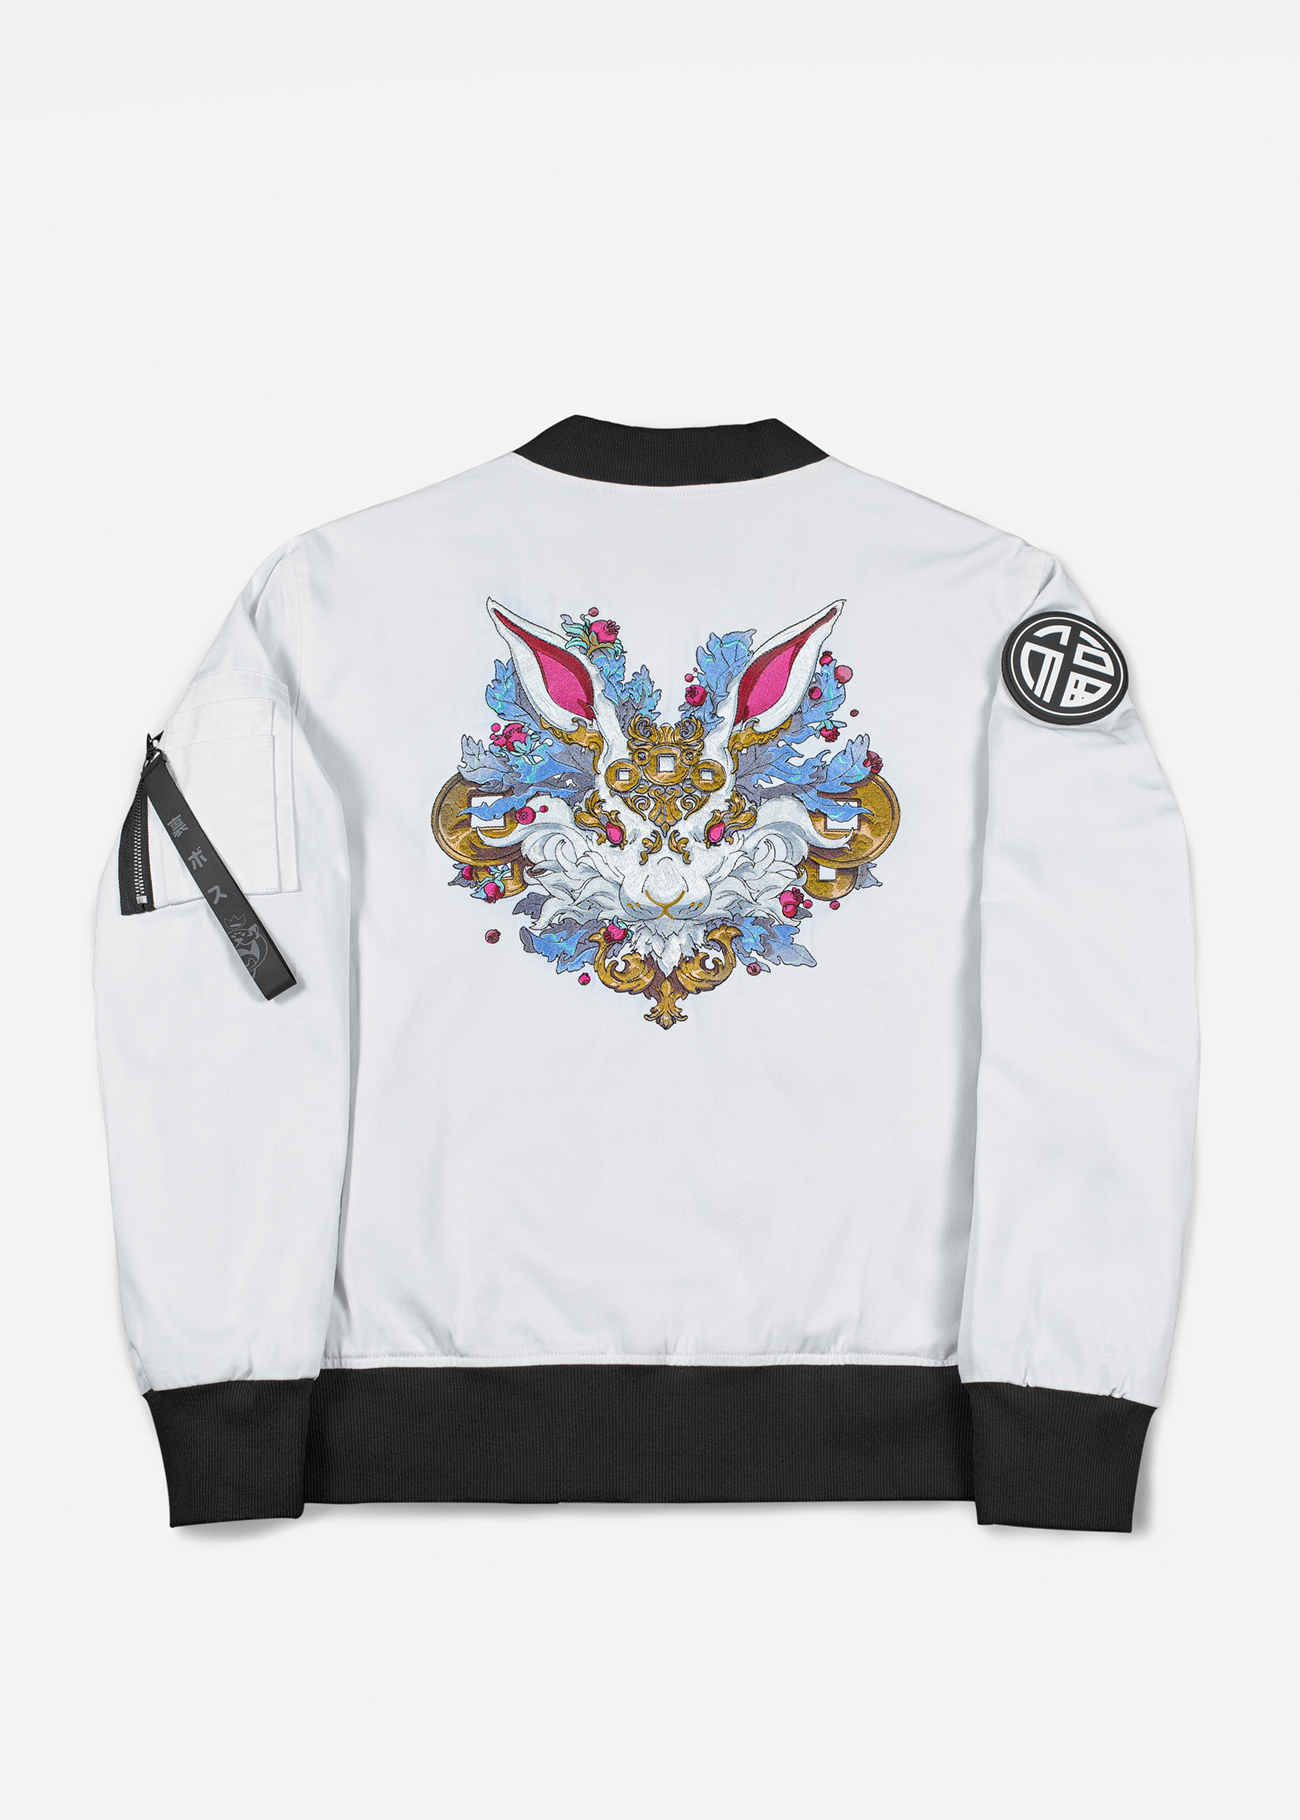 Photo of the back of Zodiac Bomber Jacket featuring Rabbit embroidery on a white piece of clothing